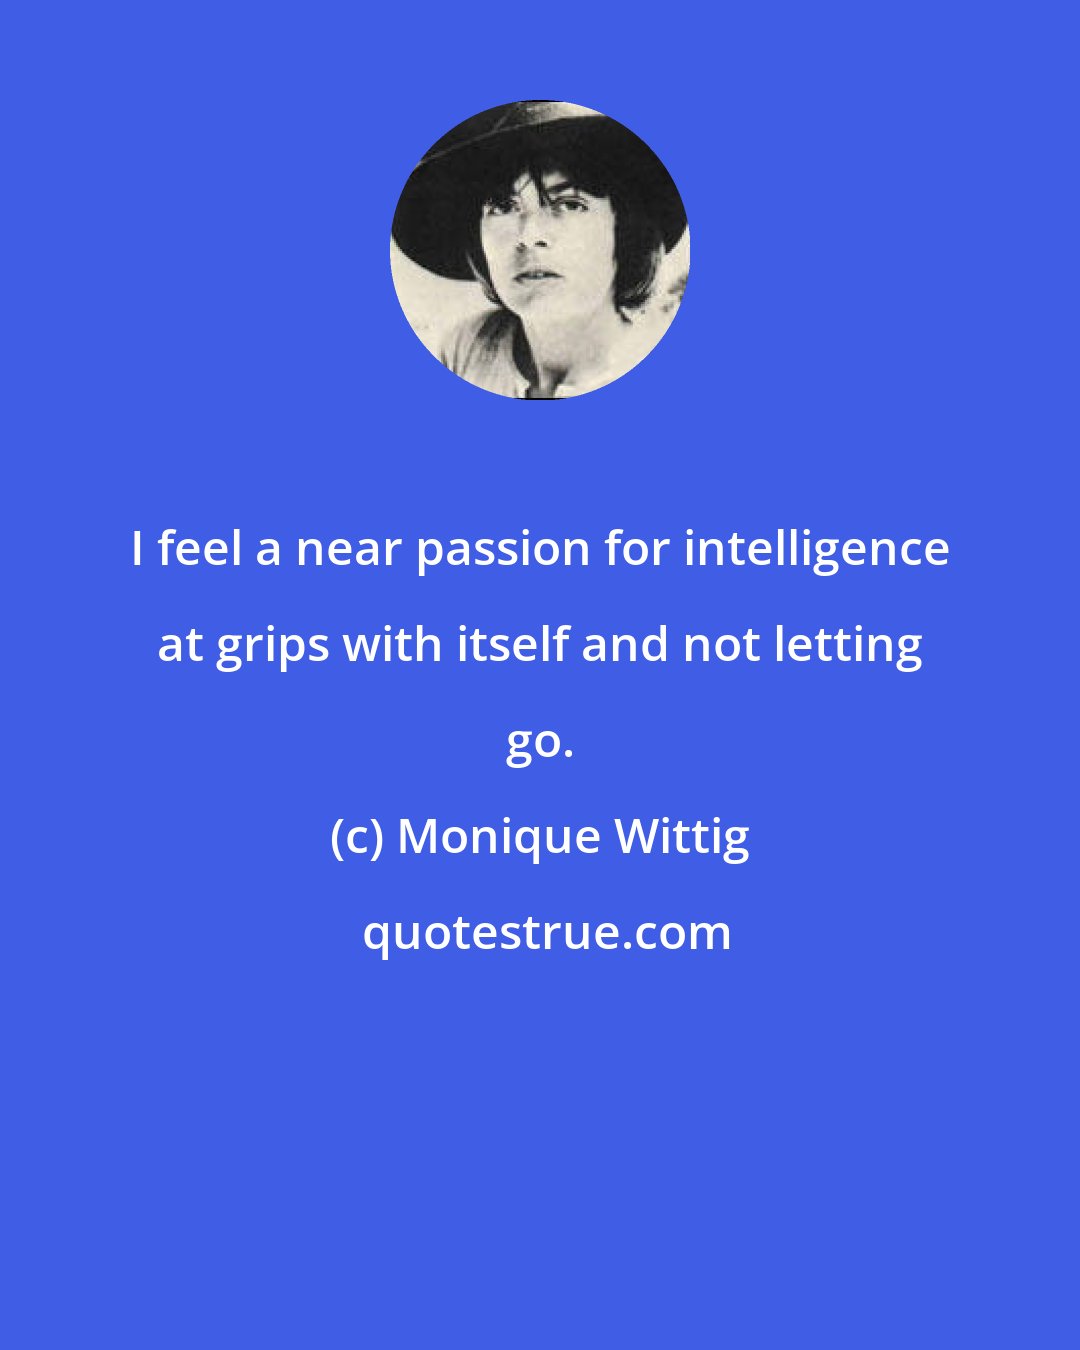 Monique Wittig: I feel a near passion for intelligence at grips with itself and not letting go.